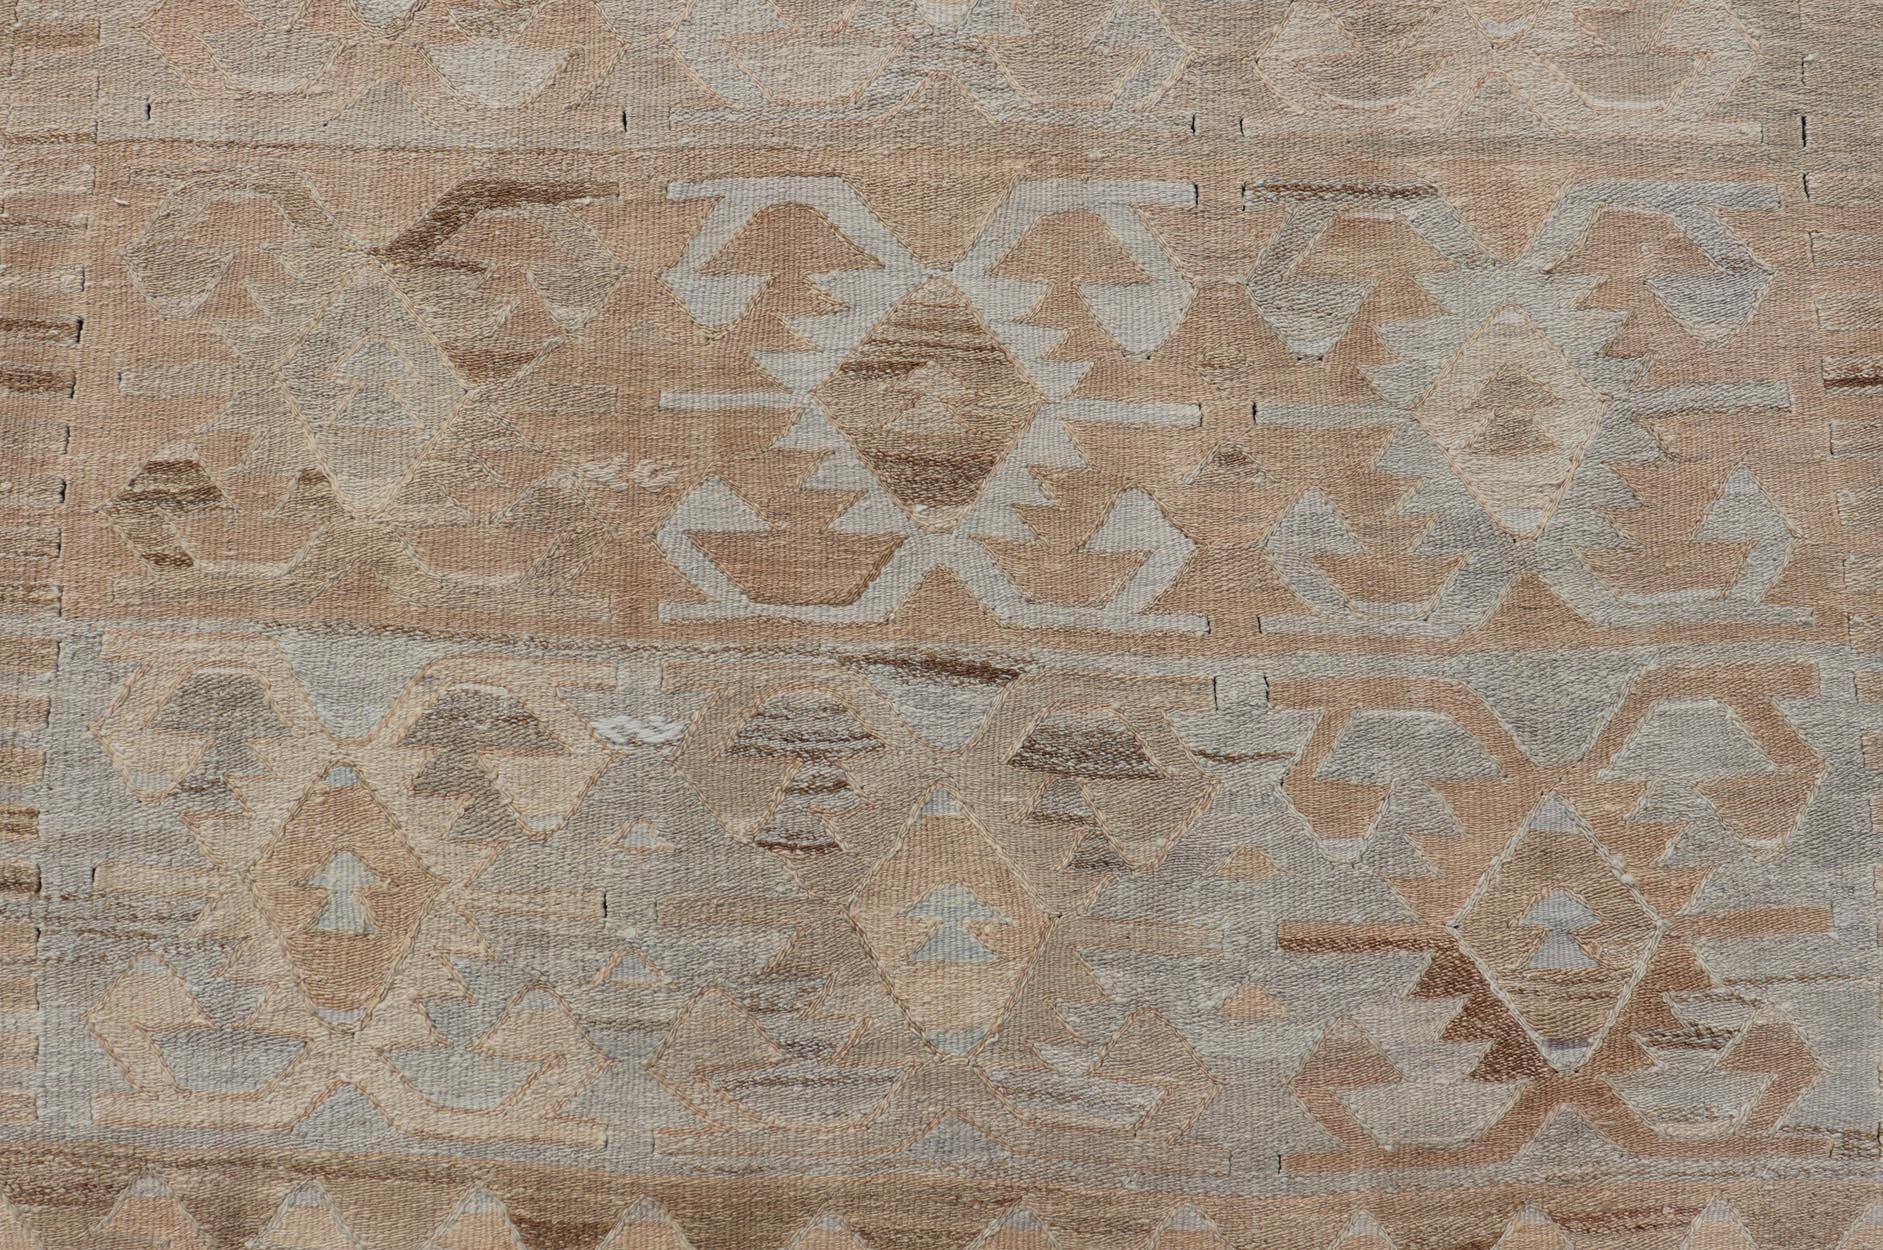 Measures: 5 x 10'1 

This vintage Turkish flat weave Kilim features tribal relics and faded earthy neutrals. The repeating design covers the entire field of muted light blue, caramel, taupe and gray. The border is a tribal saw-tooth design